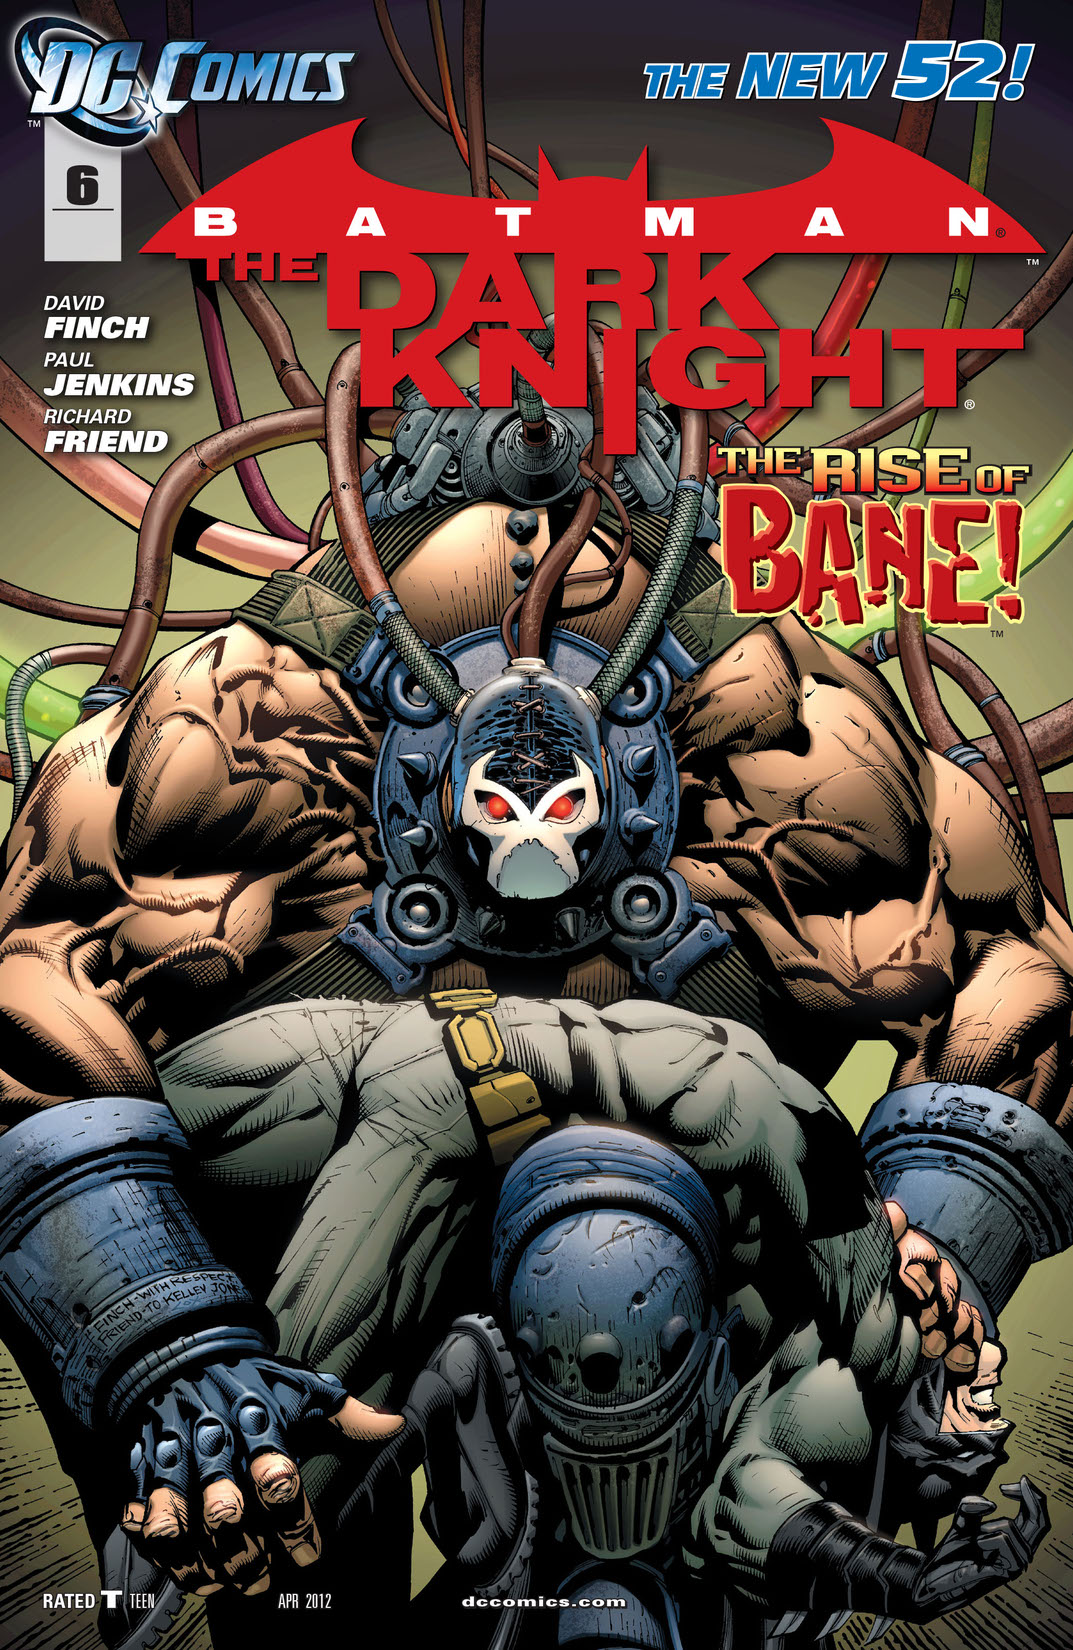 Batman: The Dark Knight (2011-) #6 preview images